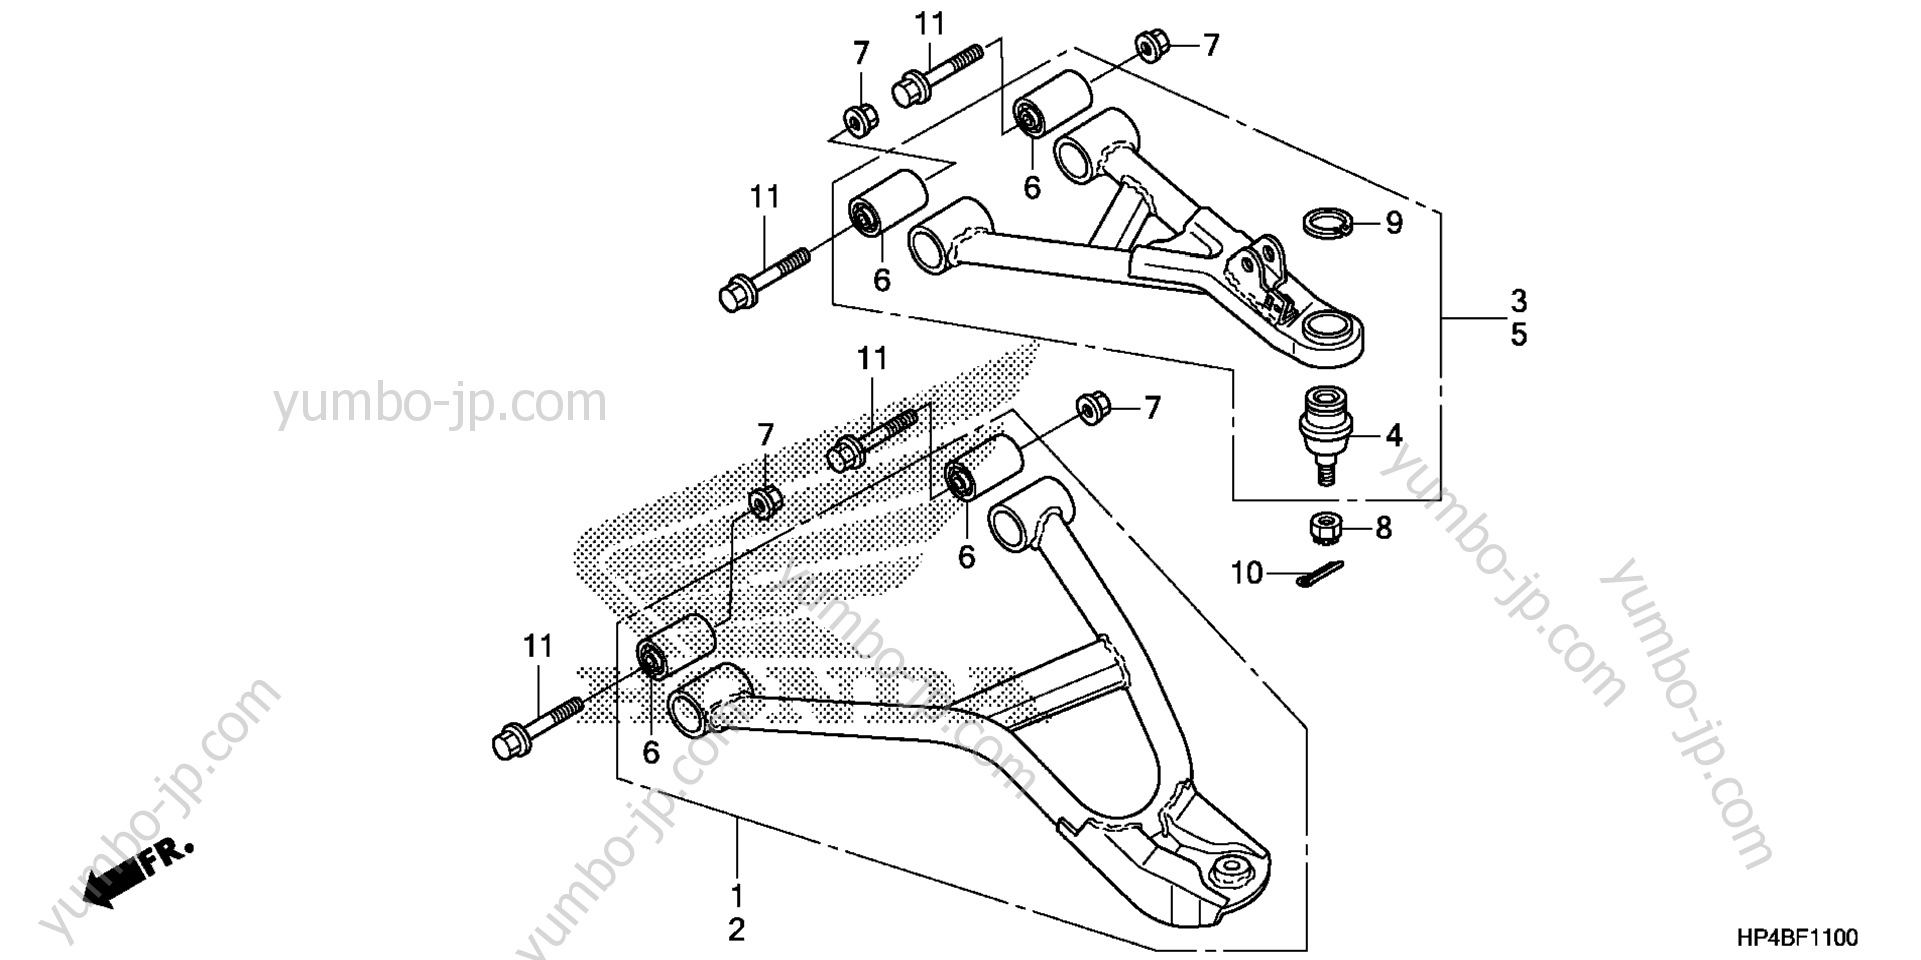 FRONT ARM (2WD) for ATVs HONDA TRX420TM A 2011 year